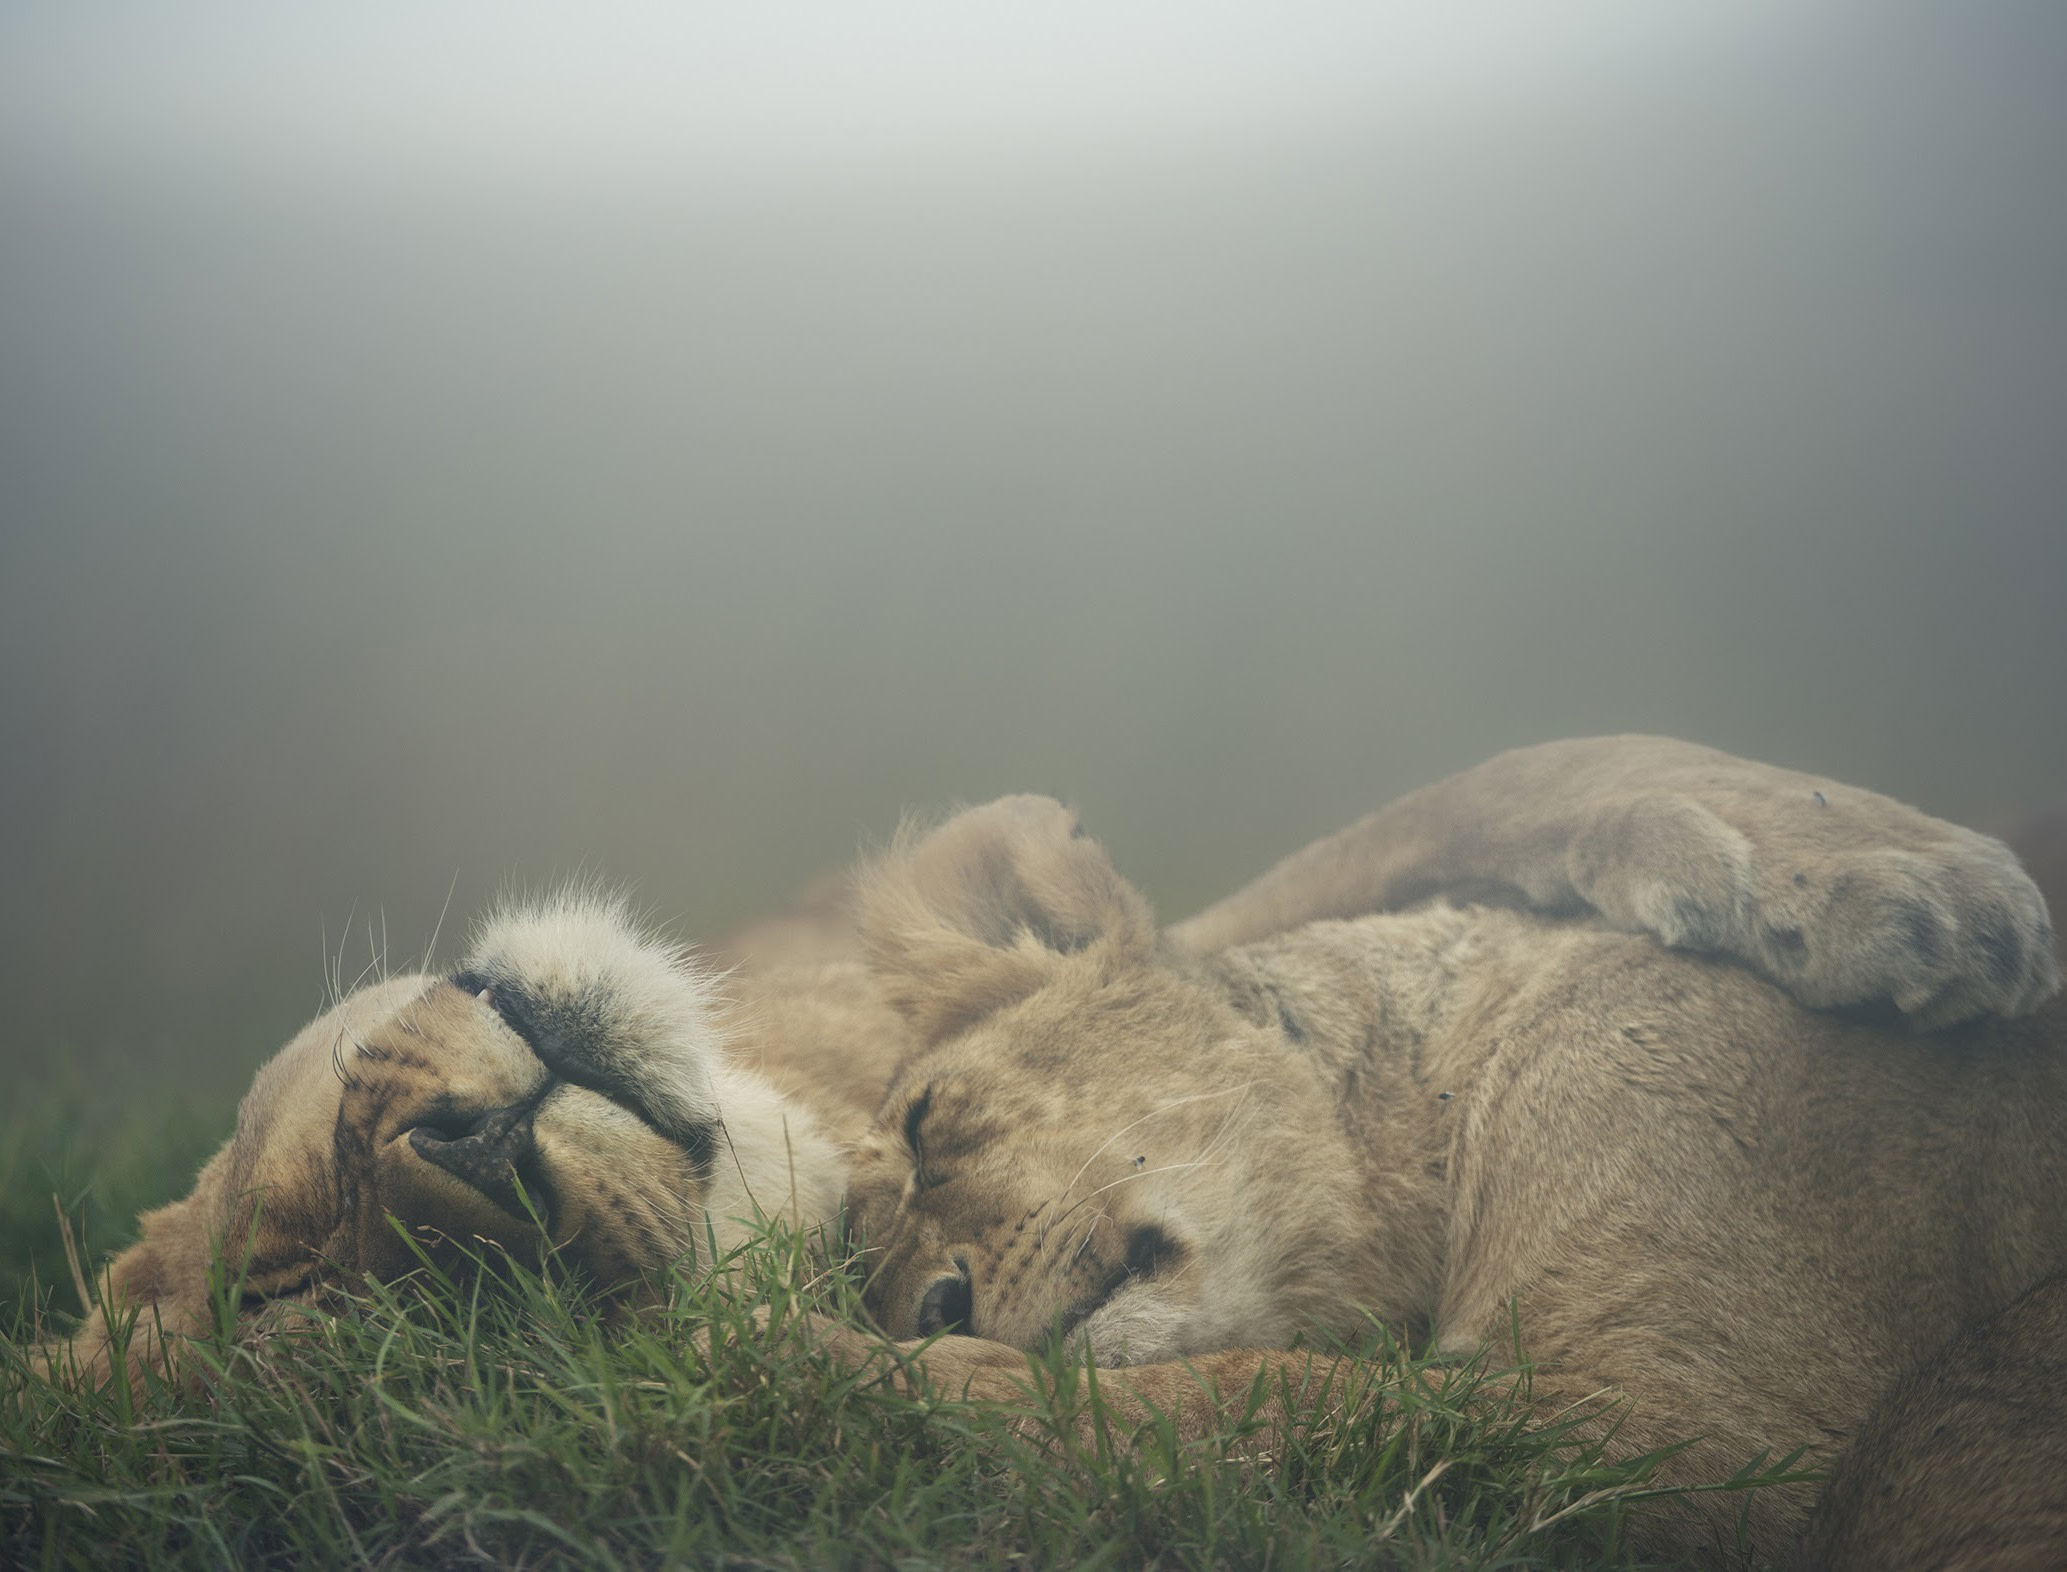 Two lions sleeping - Book of Leon